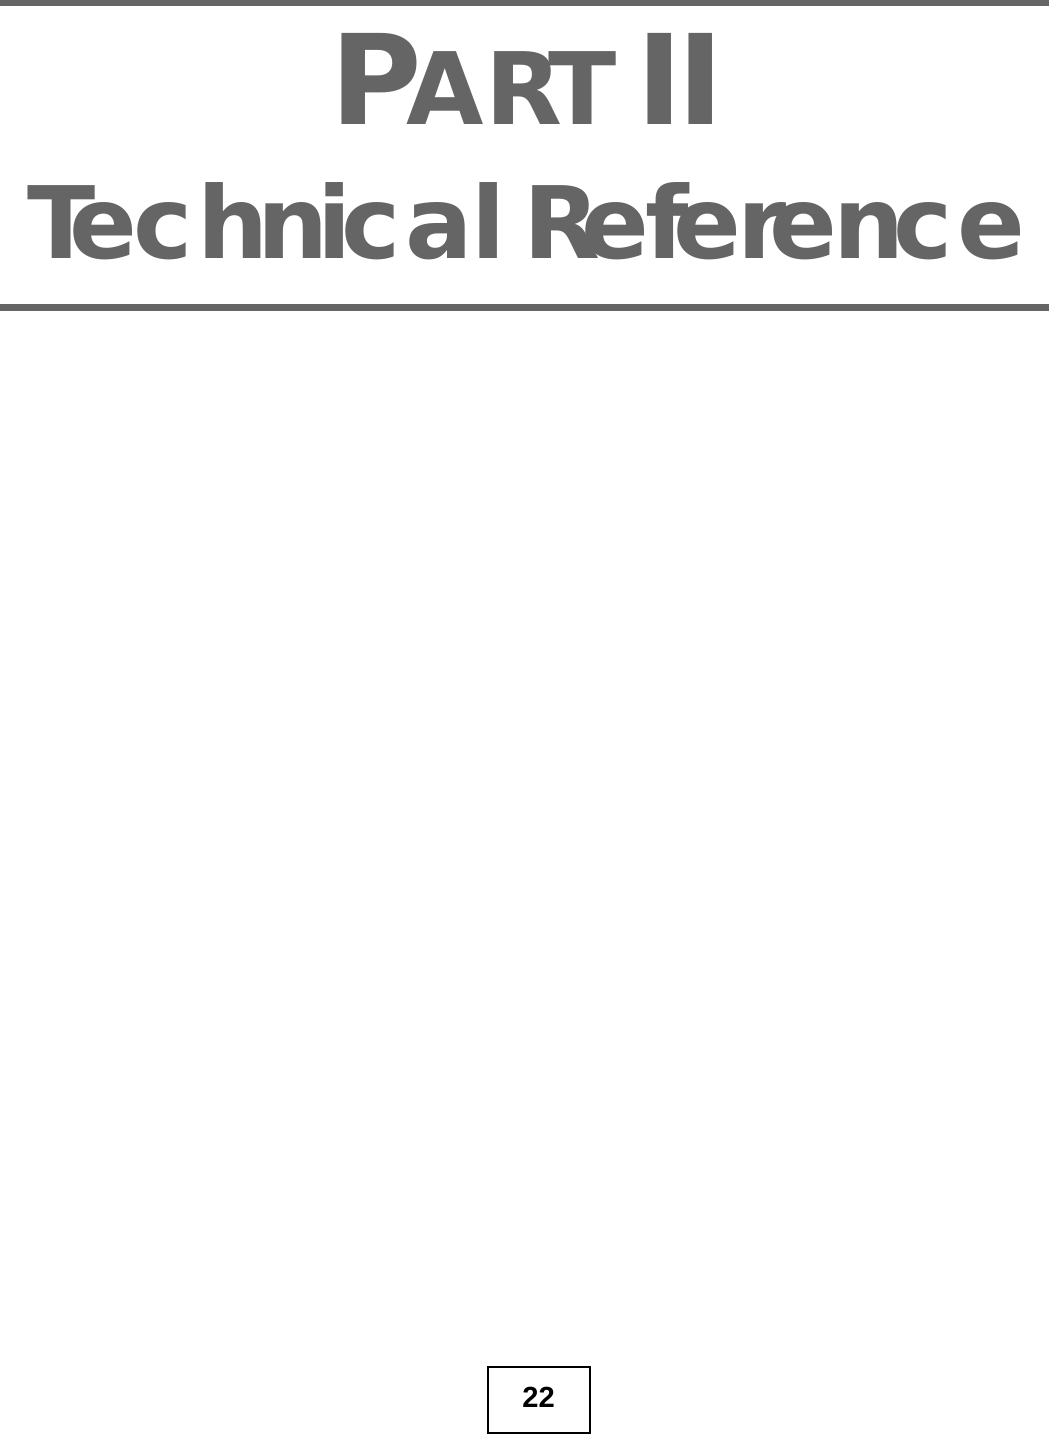 22PART IITechnical Reference